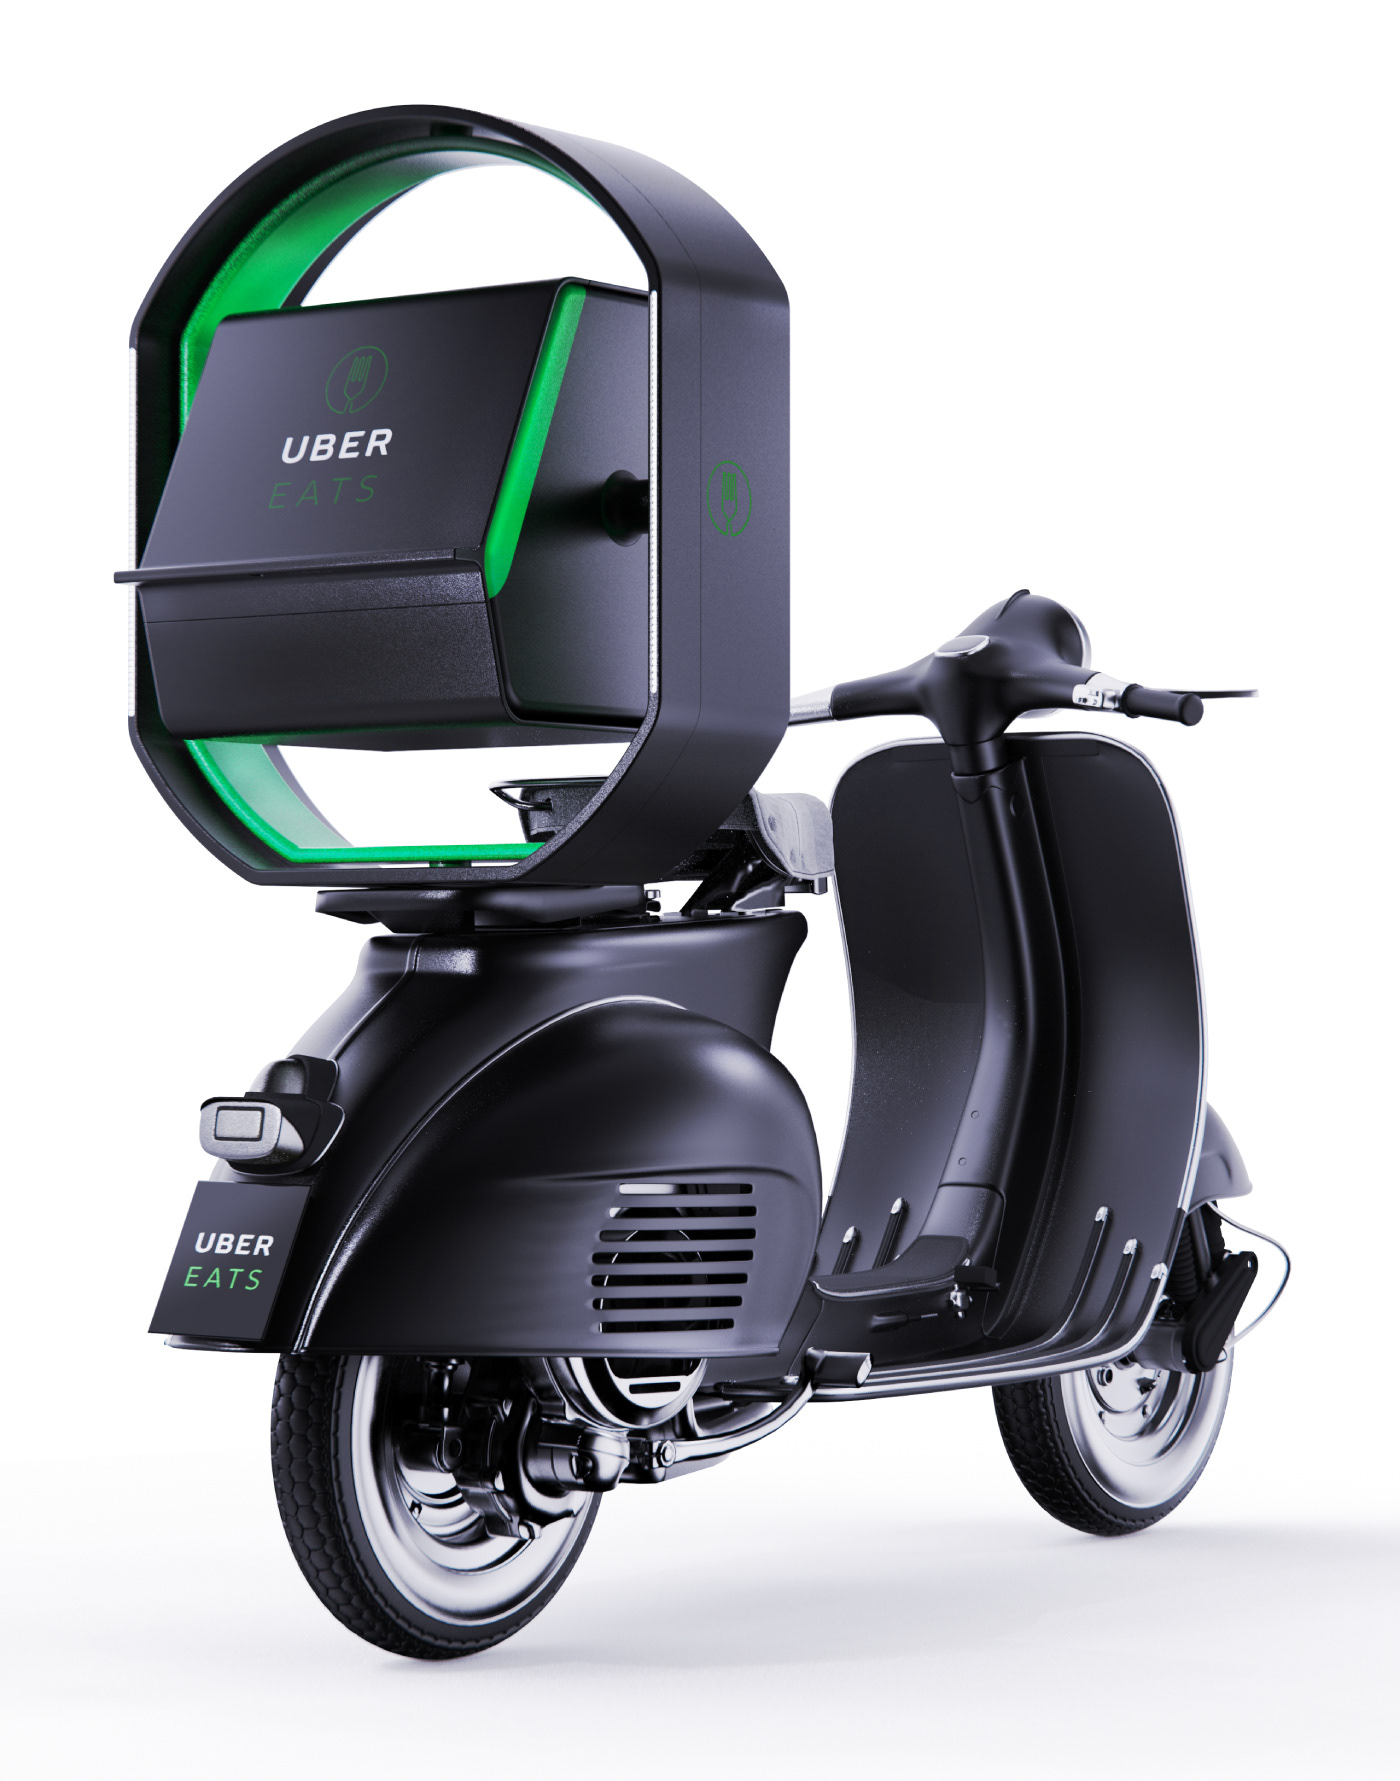 auto bicycle delivery delivery bag gyroscope motorcycle product design  Uber uber eats UI/UX design